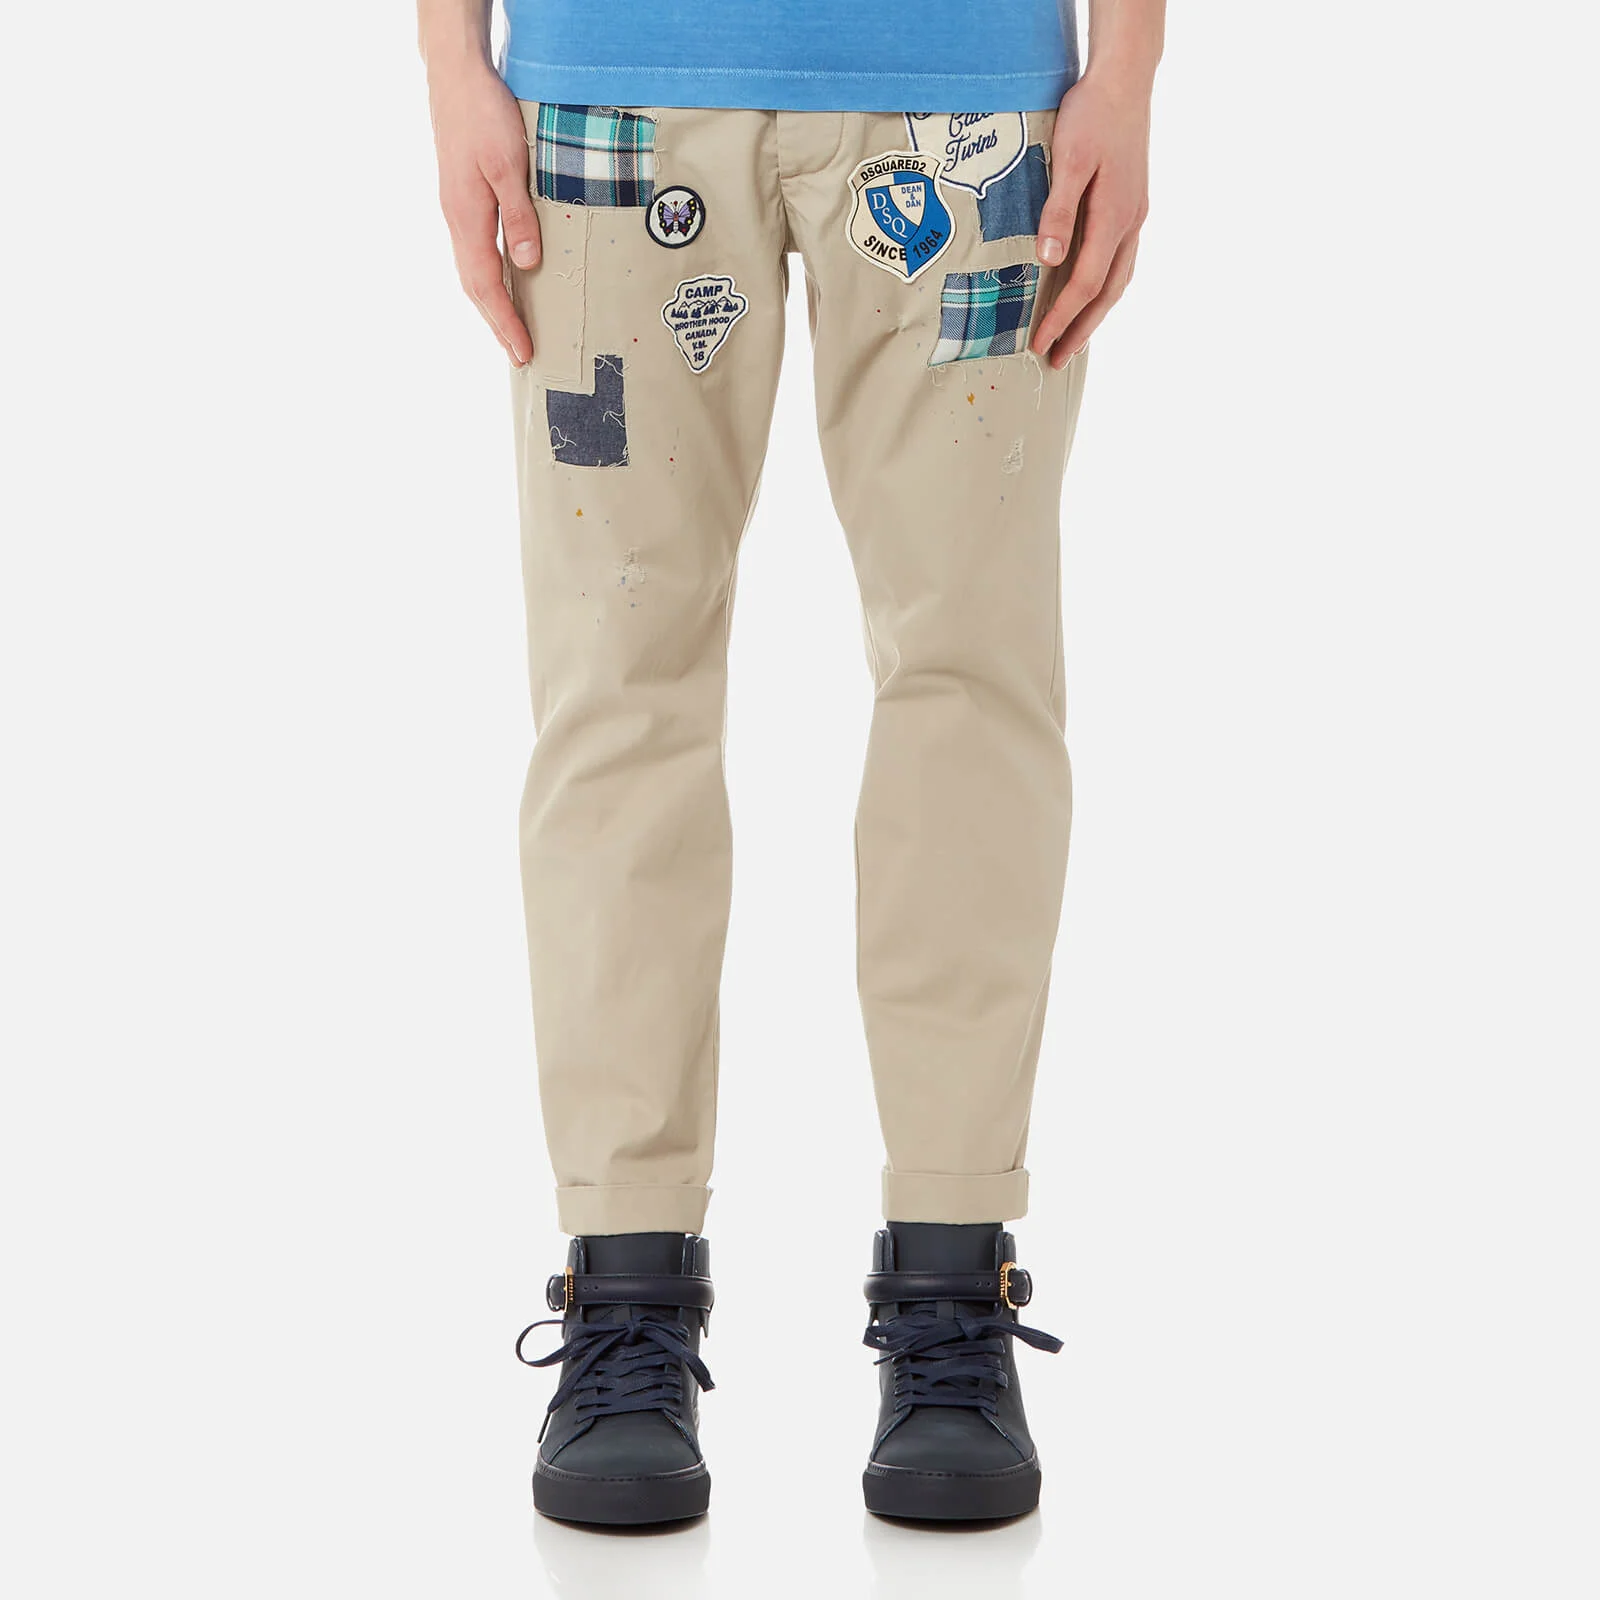 Dsquared2 Men's Hockney Fit Chinos with Patches - Stone Image 1